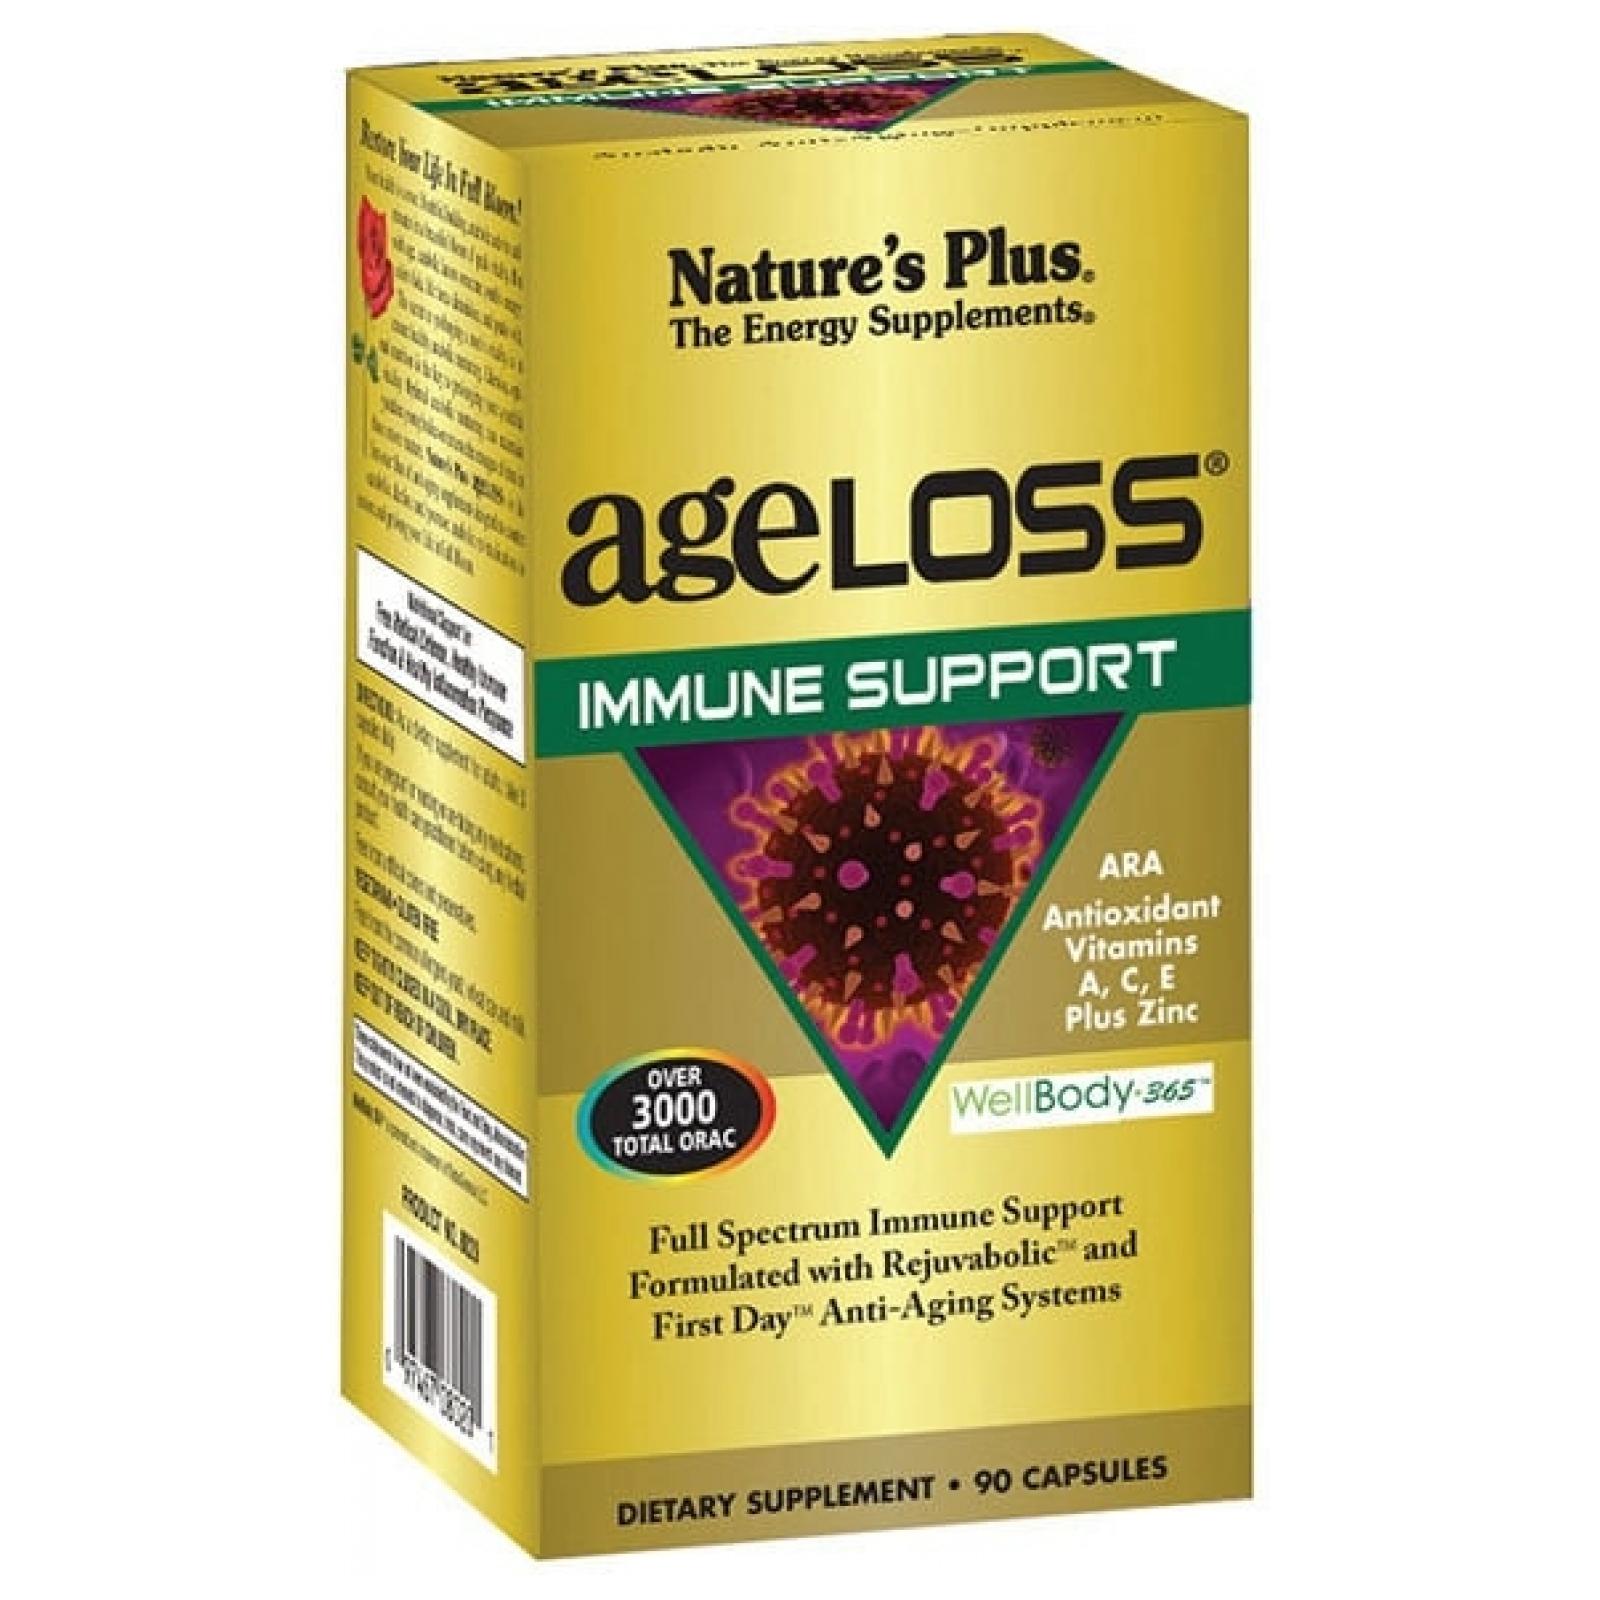 Natures source life. Nature Splus age loss Liver support 90 Capsules. Nature's Plus для сердца. Naturesplus, immune support,. Immune Plus nature Aid.